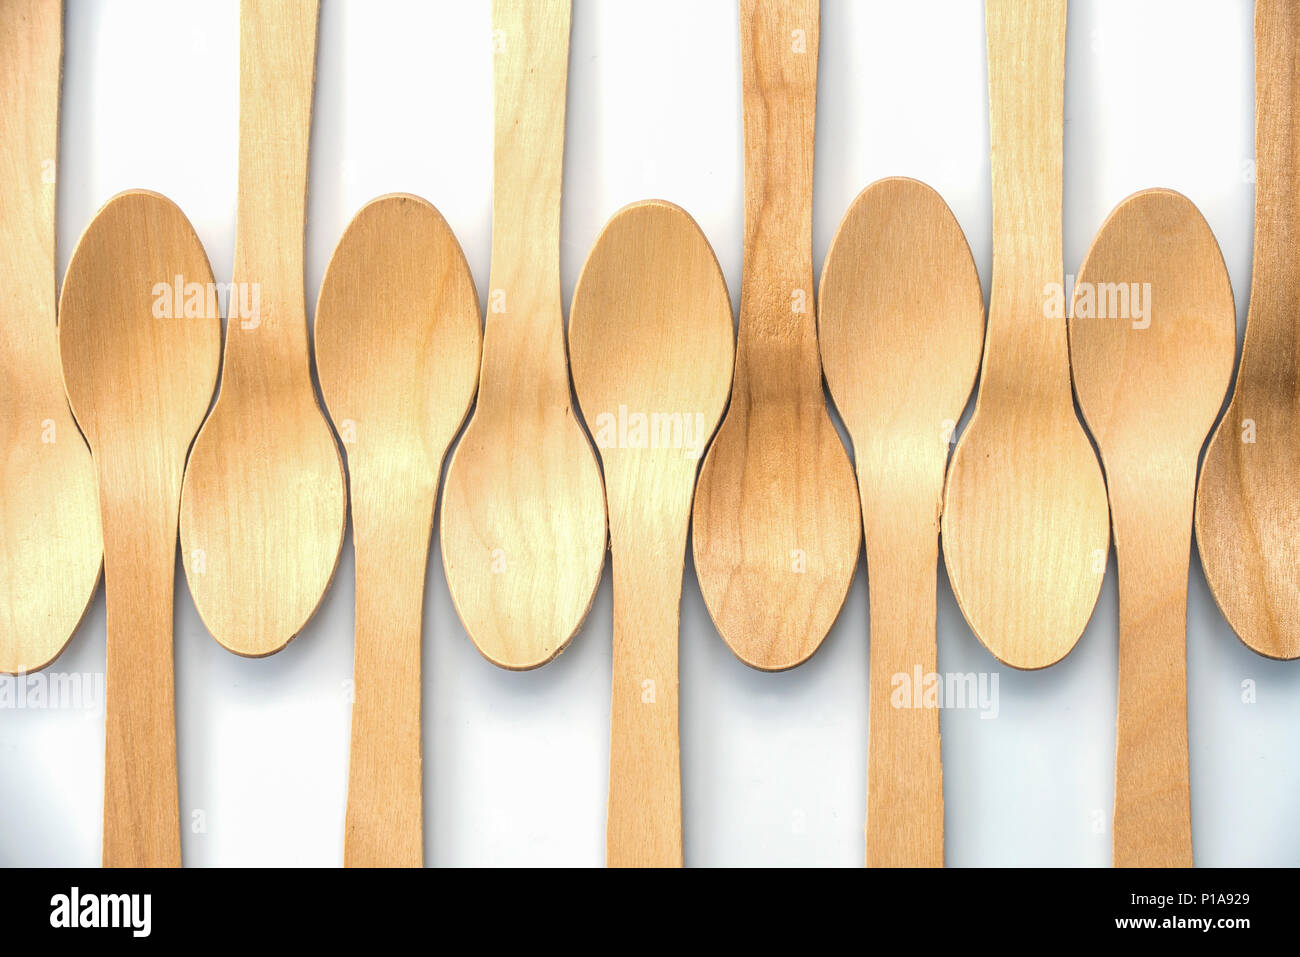 Wooden biodegradable spoons aligned on white background Stock Photo